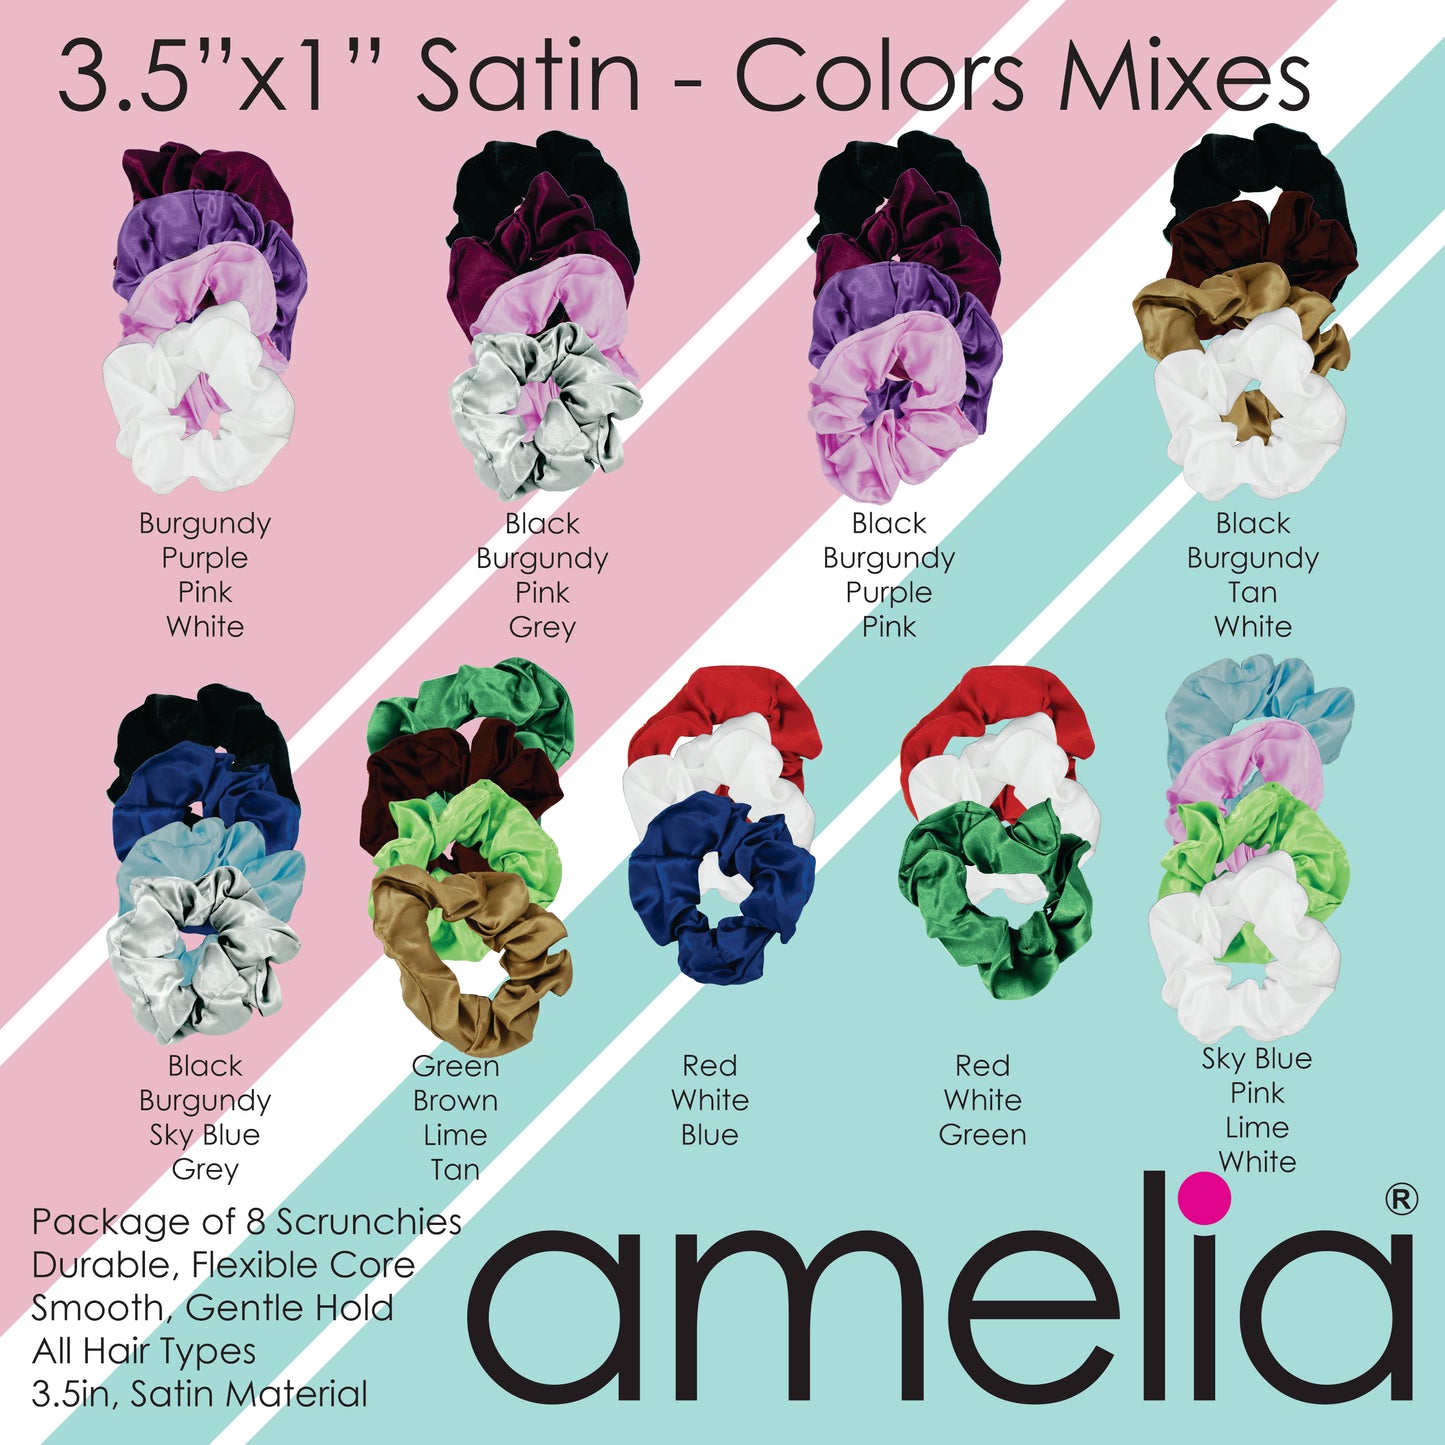 Amelia Beauty Products, White Satin Scrunchies, 3.5in Diameter, Gentle on Hair, Strong Hold, No Snag, No Dents or Creases. 8 Pack